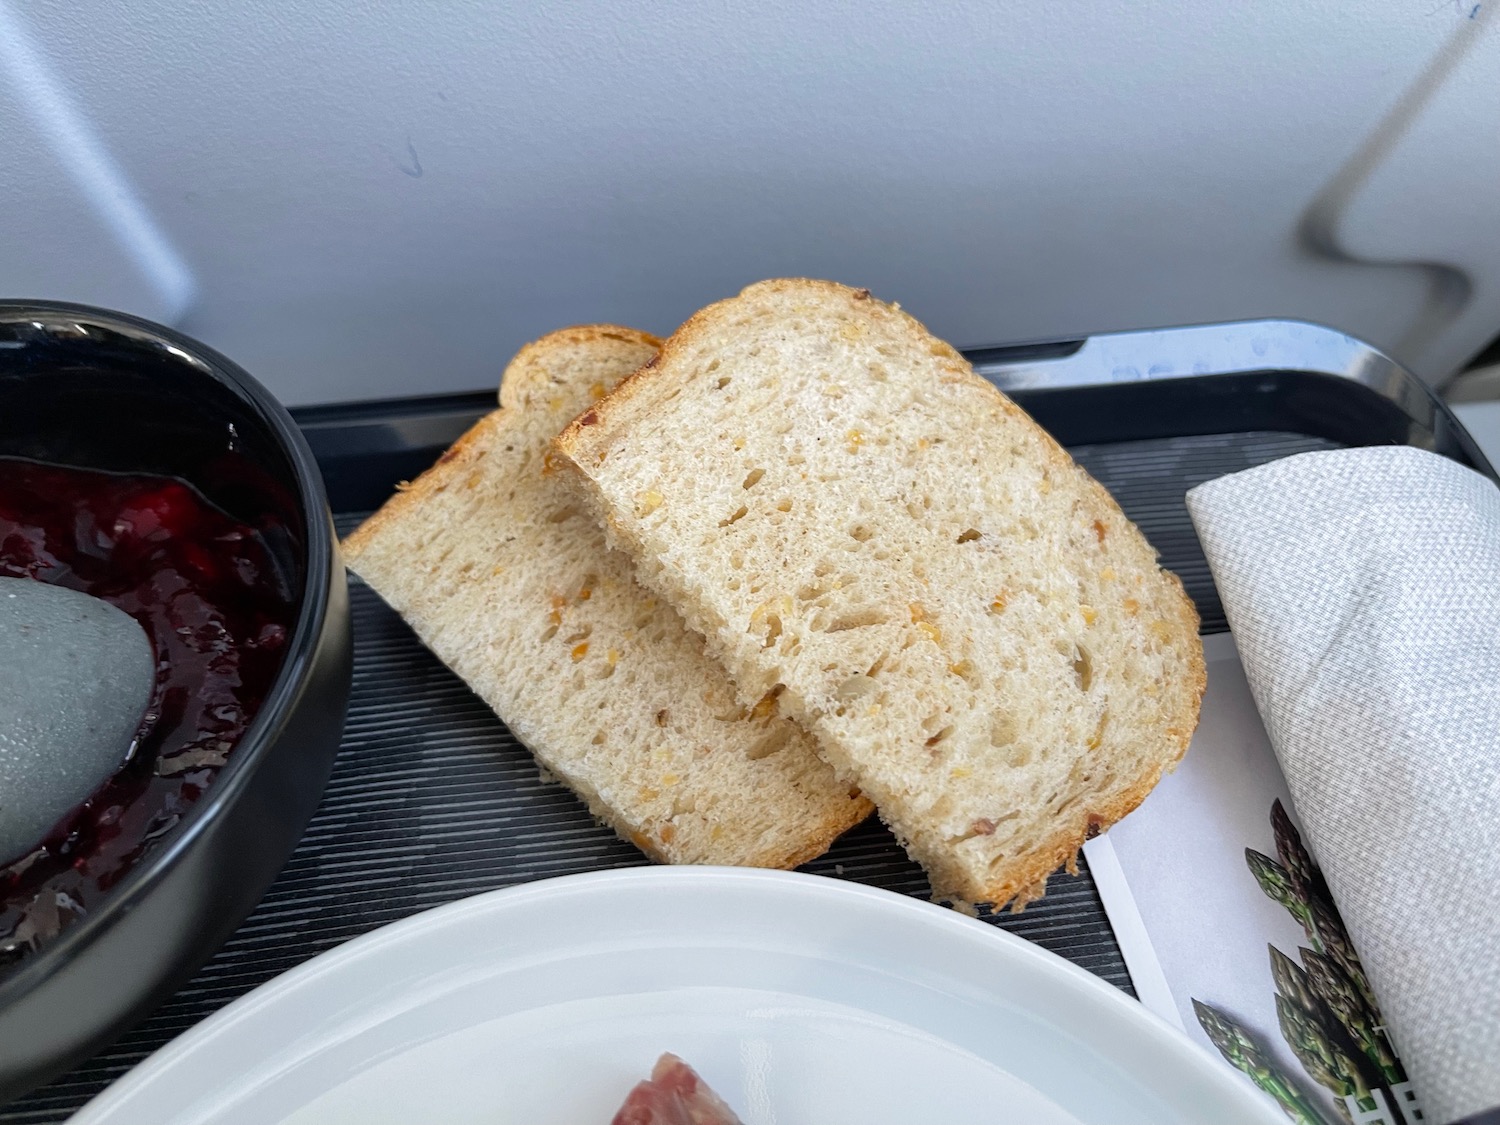 a plate of jam and bread on a tray